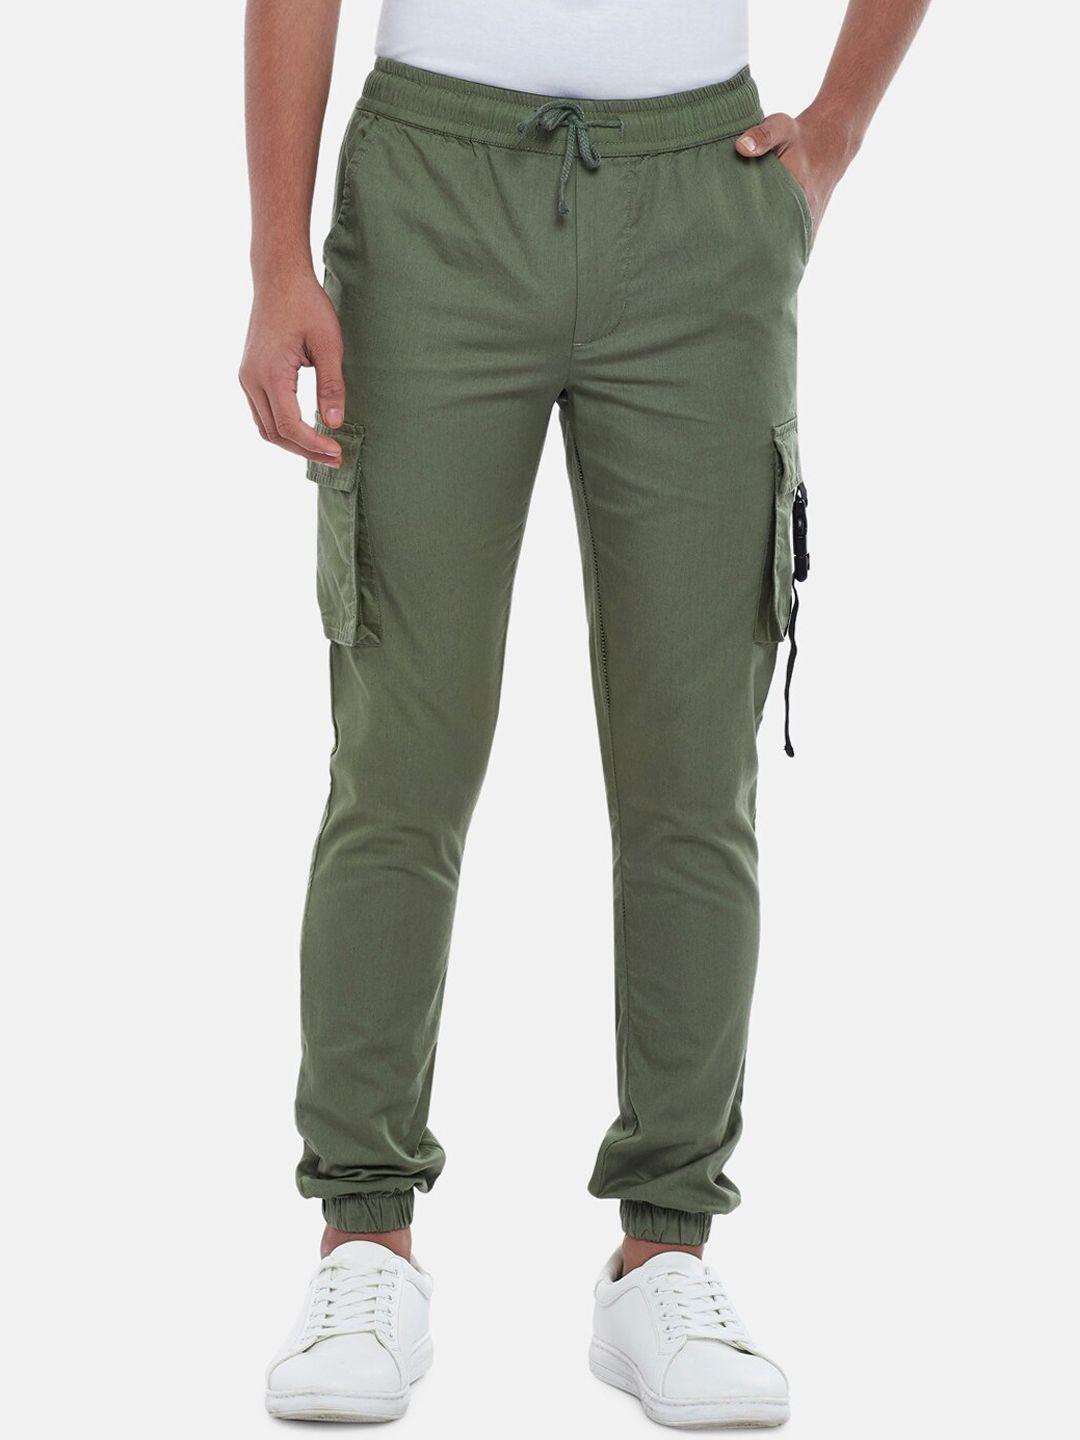 coolsters by pantaloons boys olive green cargos trouser